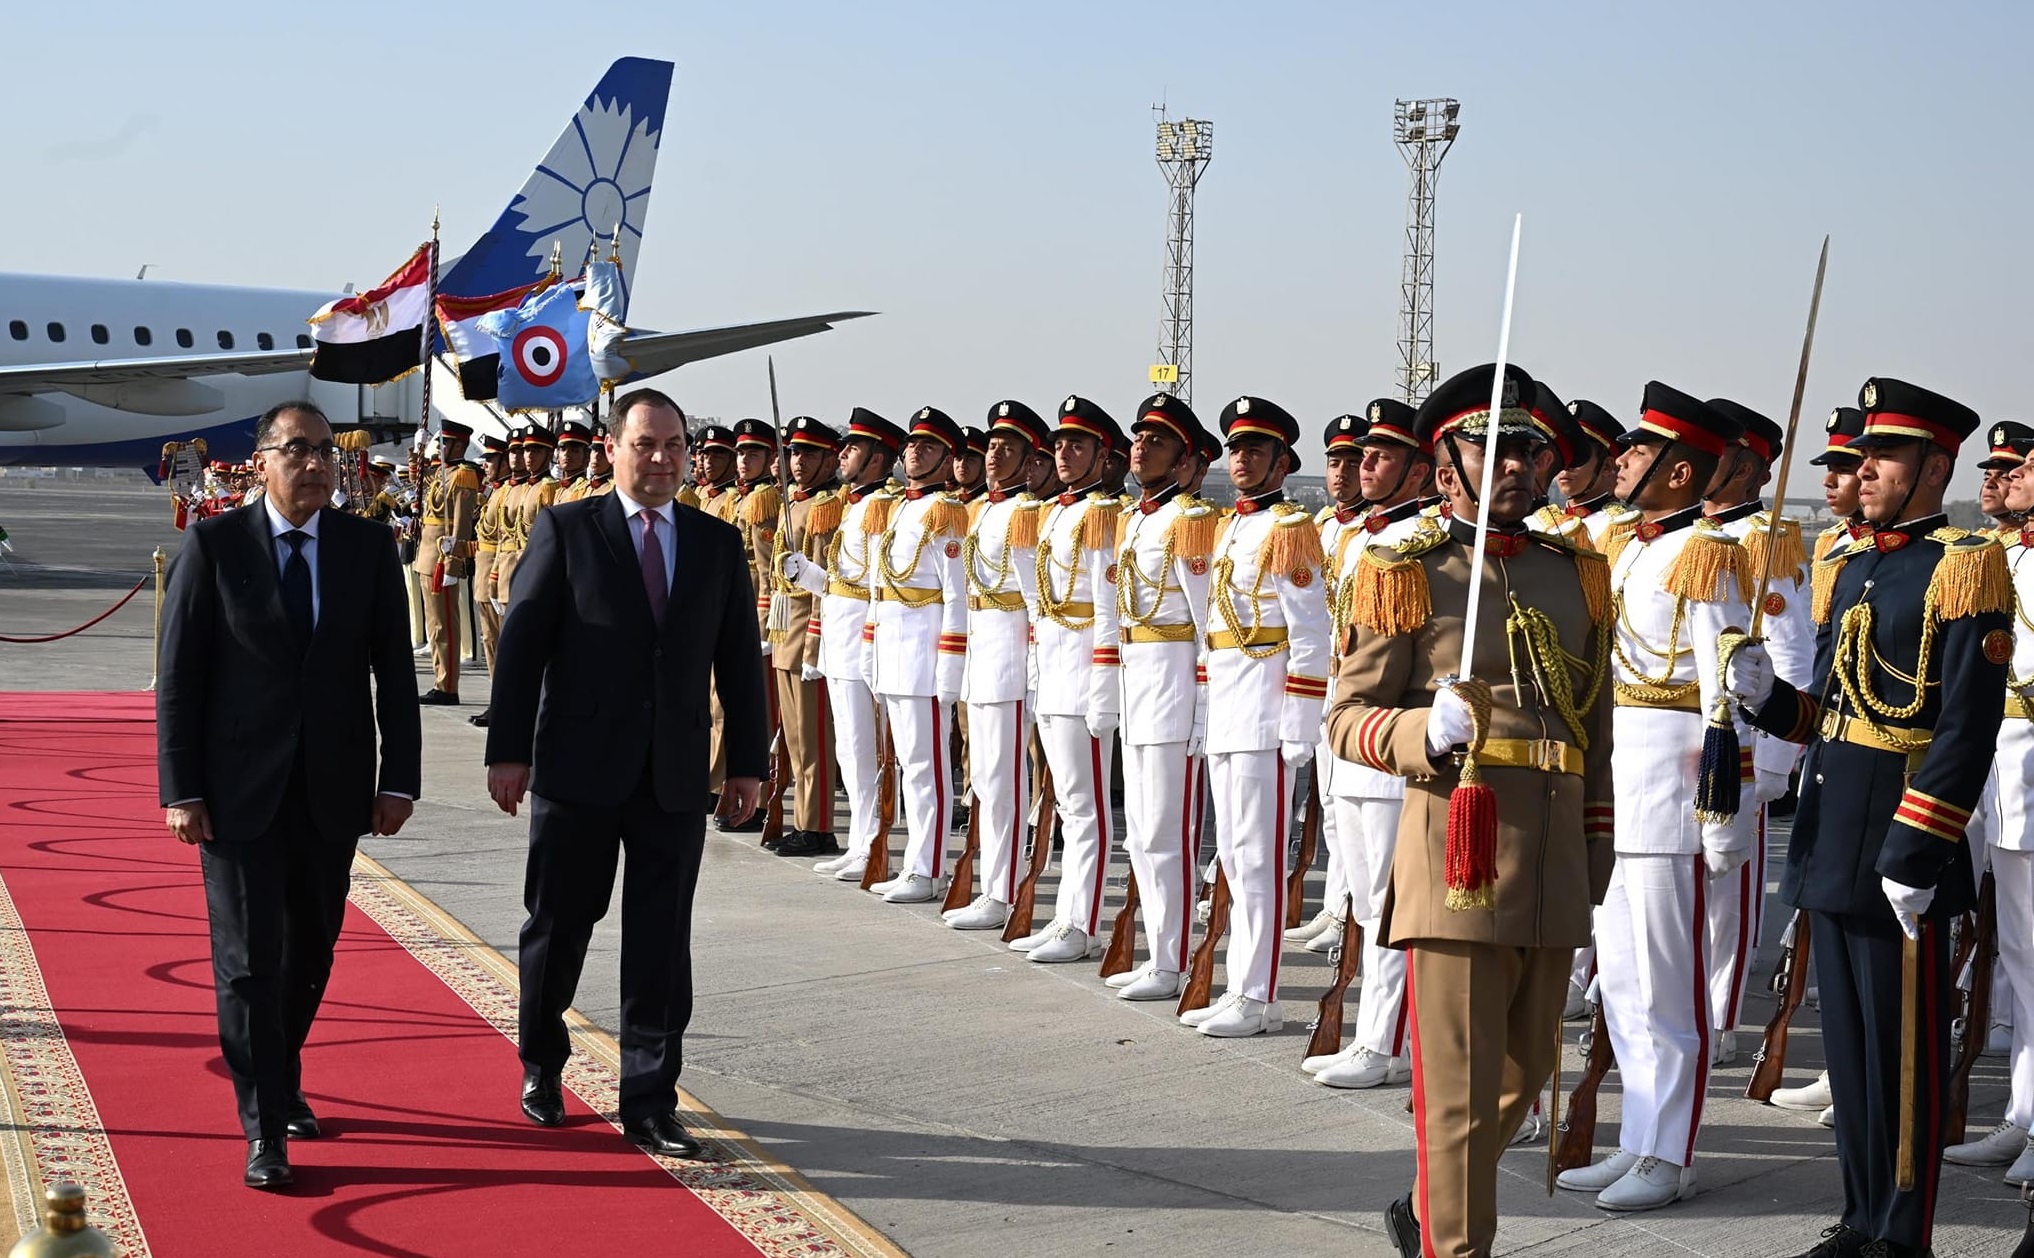 Belarusian prime minister embarks on official visit to Cairo

